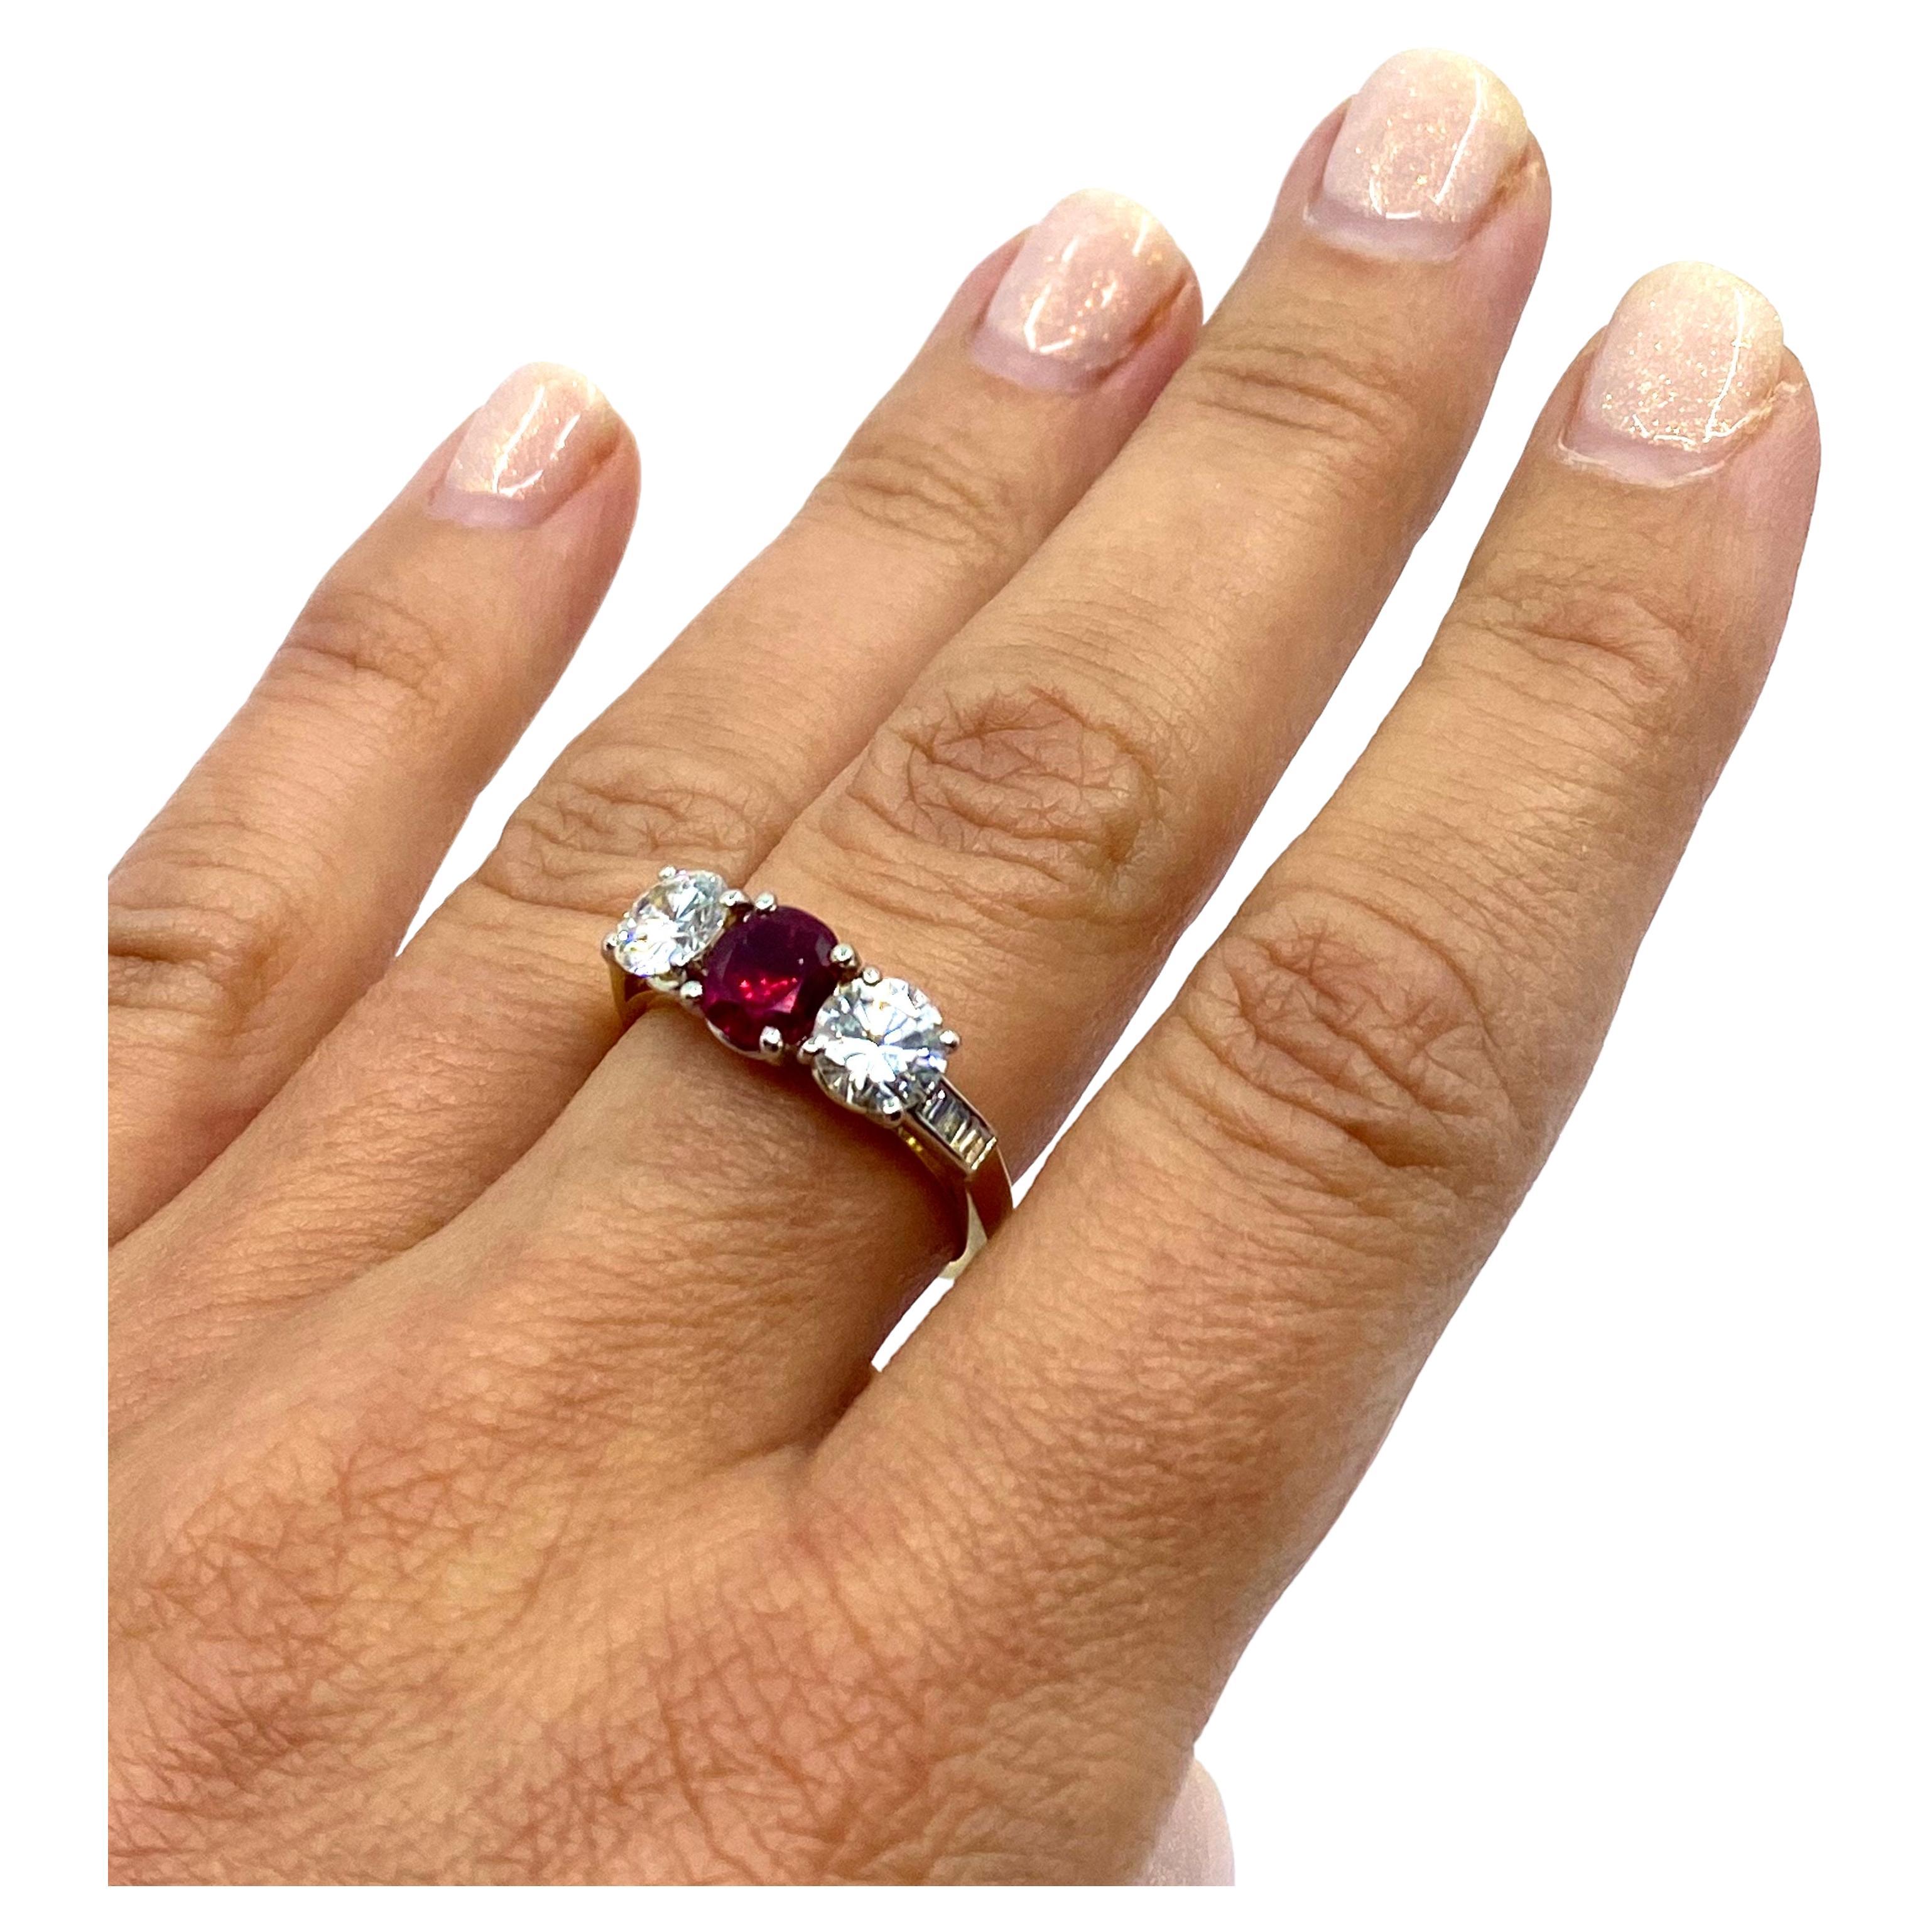 

A beautiful three stone engagement ring, made of 18k gold, featuring diamonds and a ruby.
The oval cut ruby is set in the center and surrounded by two brilliant cut diamonds. Baguette cut diamonds flank the central stones and adorn the shank. All